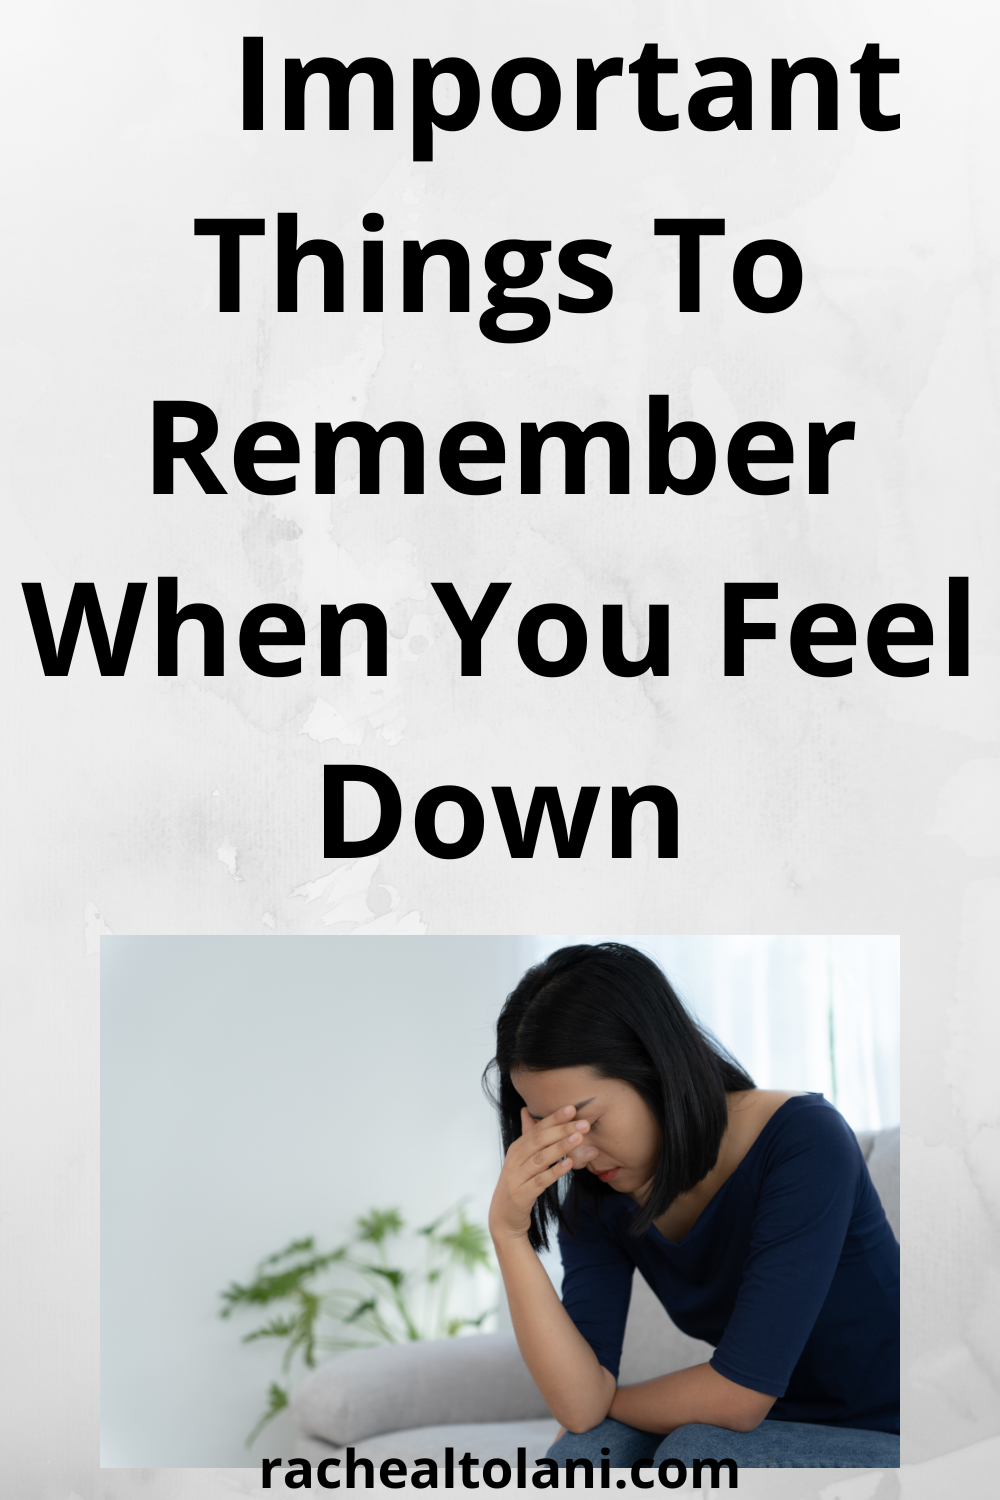 Things To Remember When You Feel Down